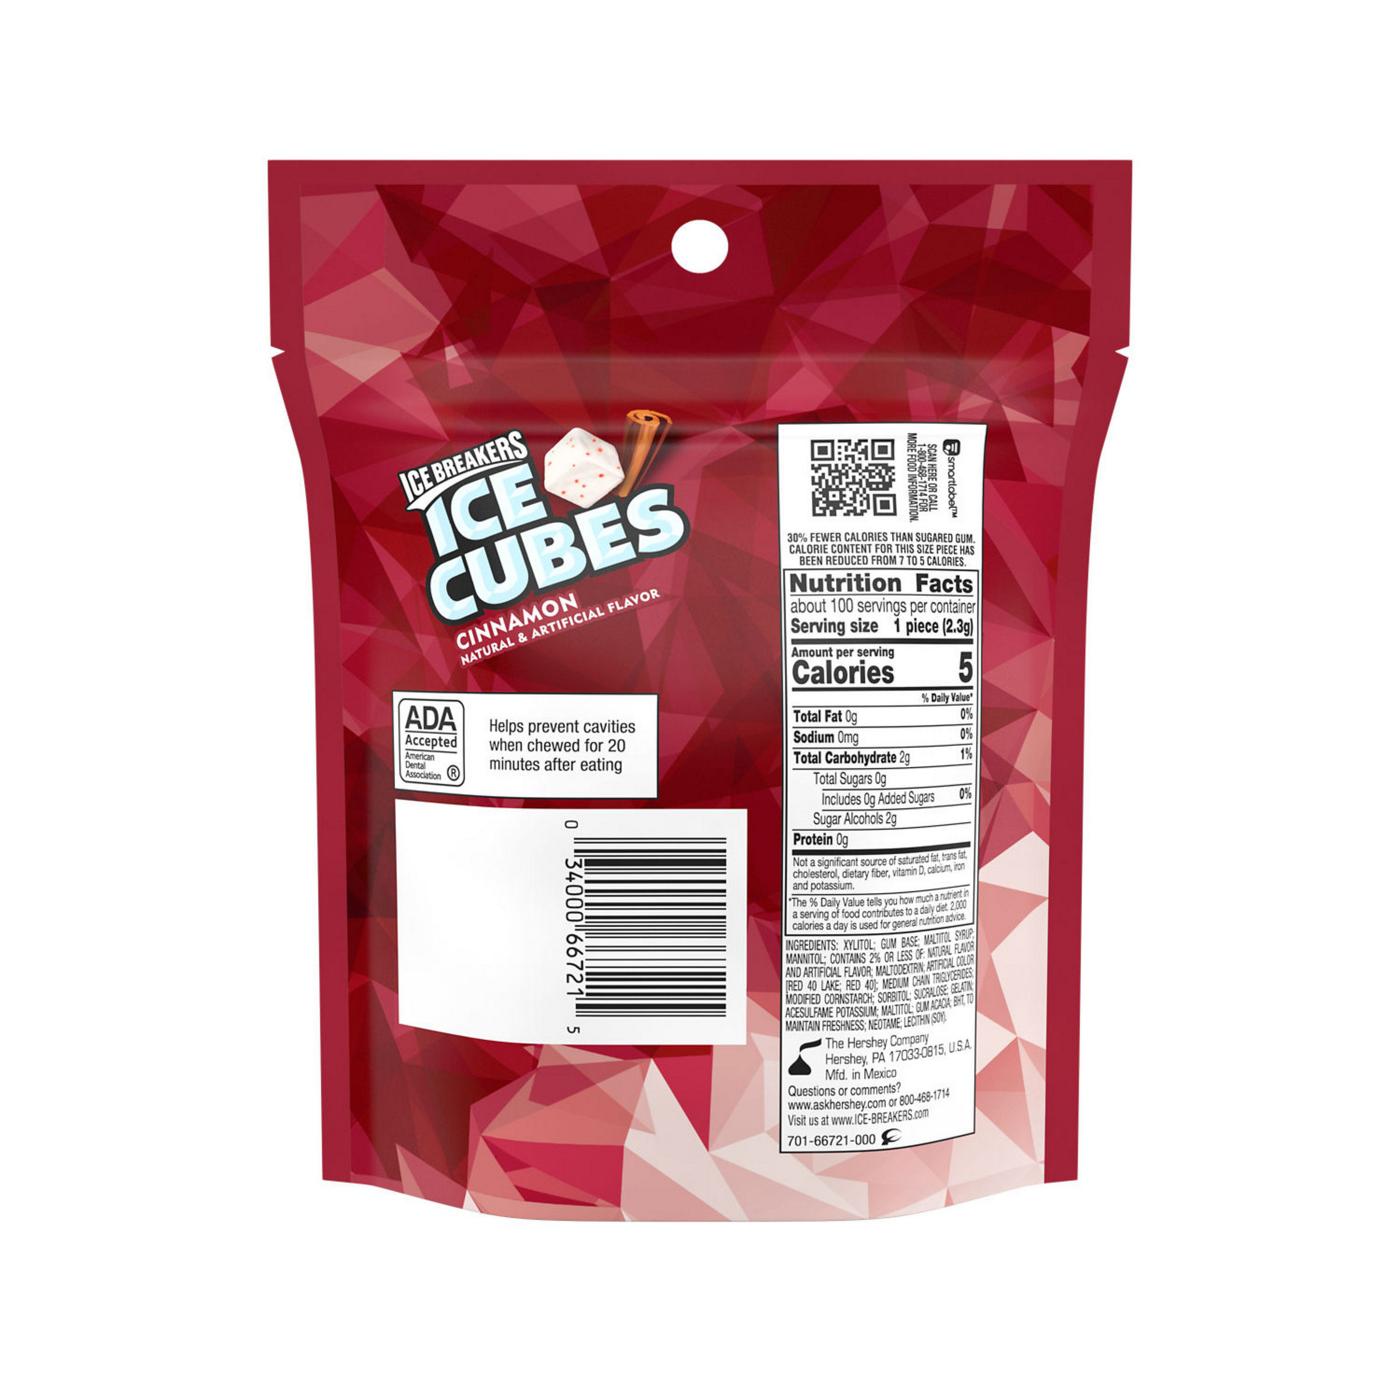 Ice Breakers Ice Cubes Cinnamon Sugar Free Gum Pouch; image 5 of 5